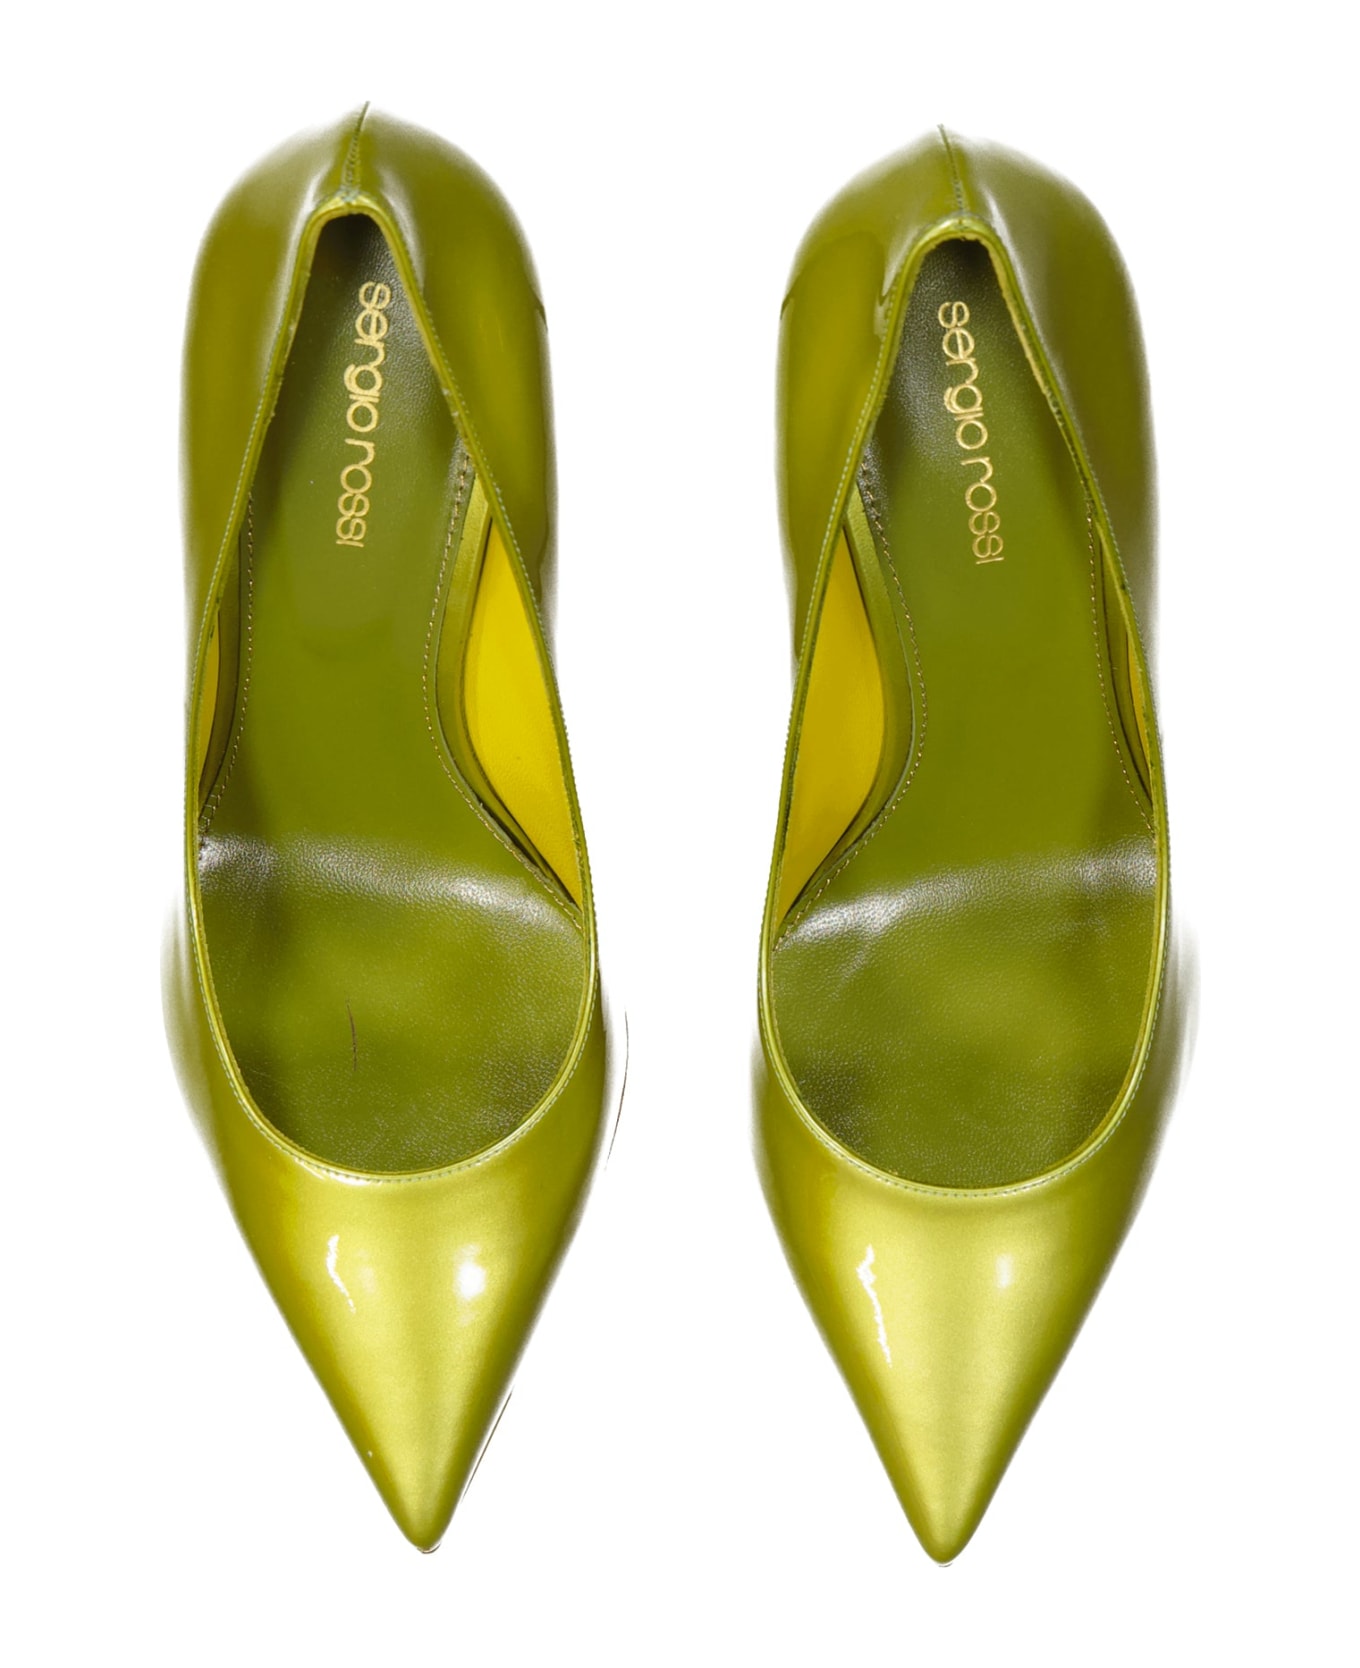 Sergio Rossi Leather Pumps - Green ハイヒール